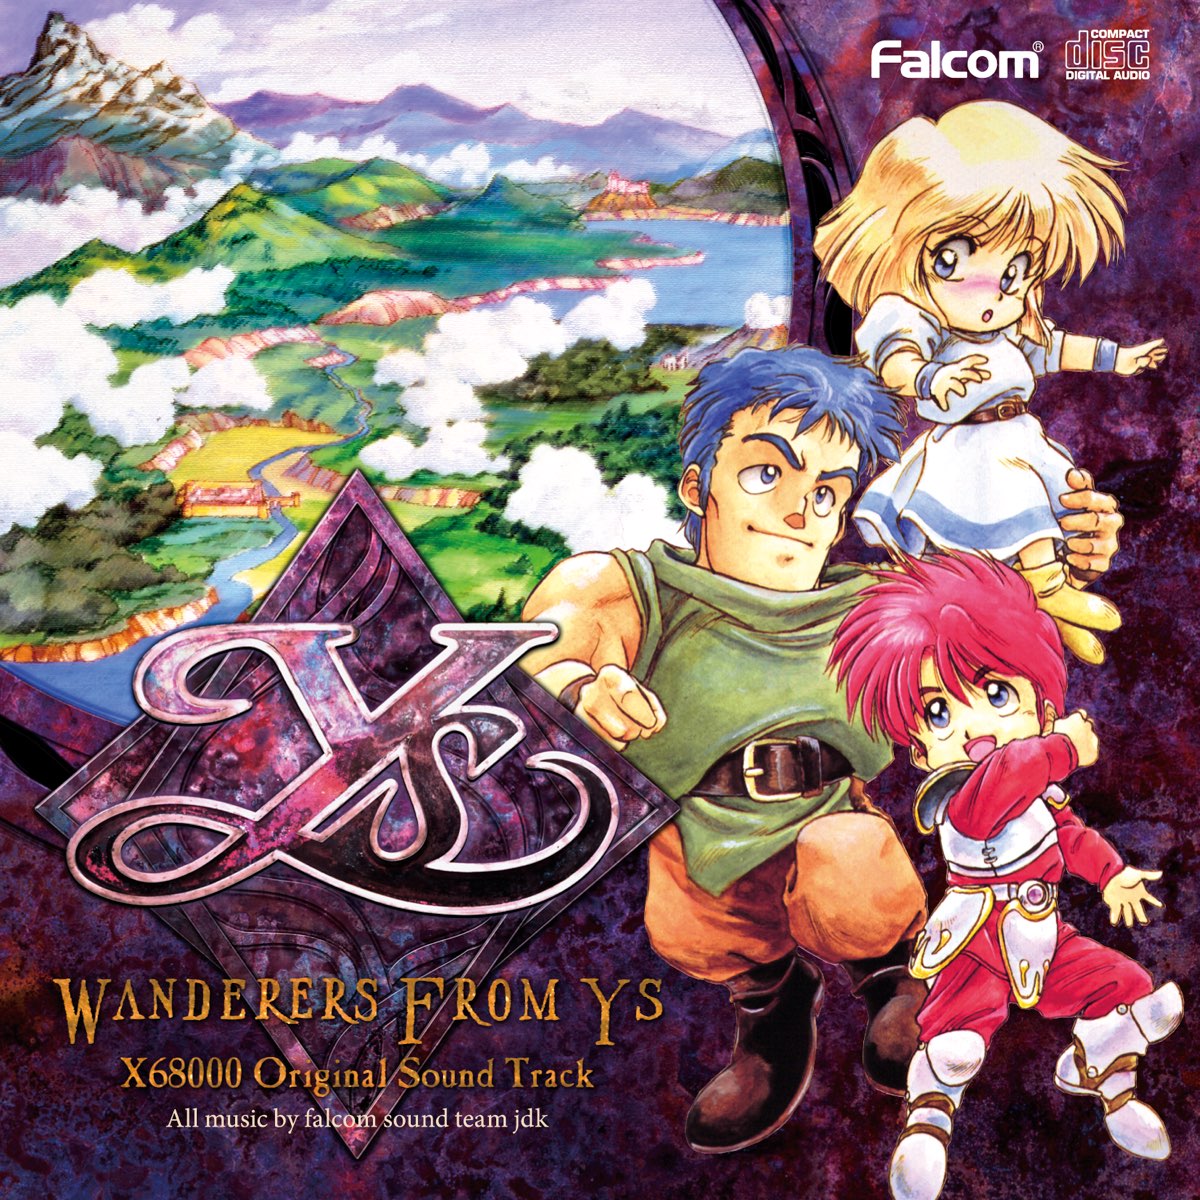 Wanderers From Ys X Original Sound Track By Falcom Sound Team Jdk On Apple Music